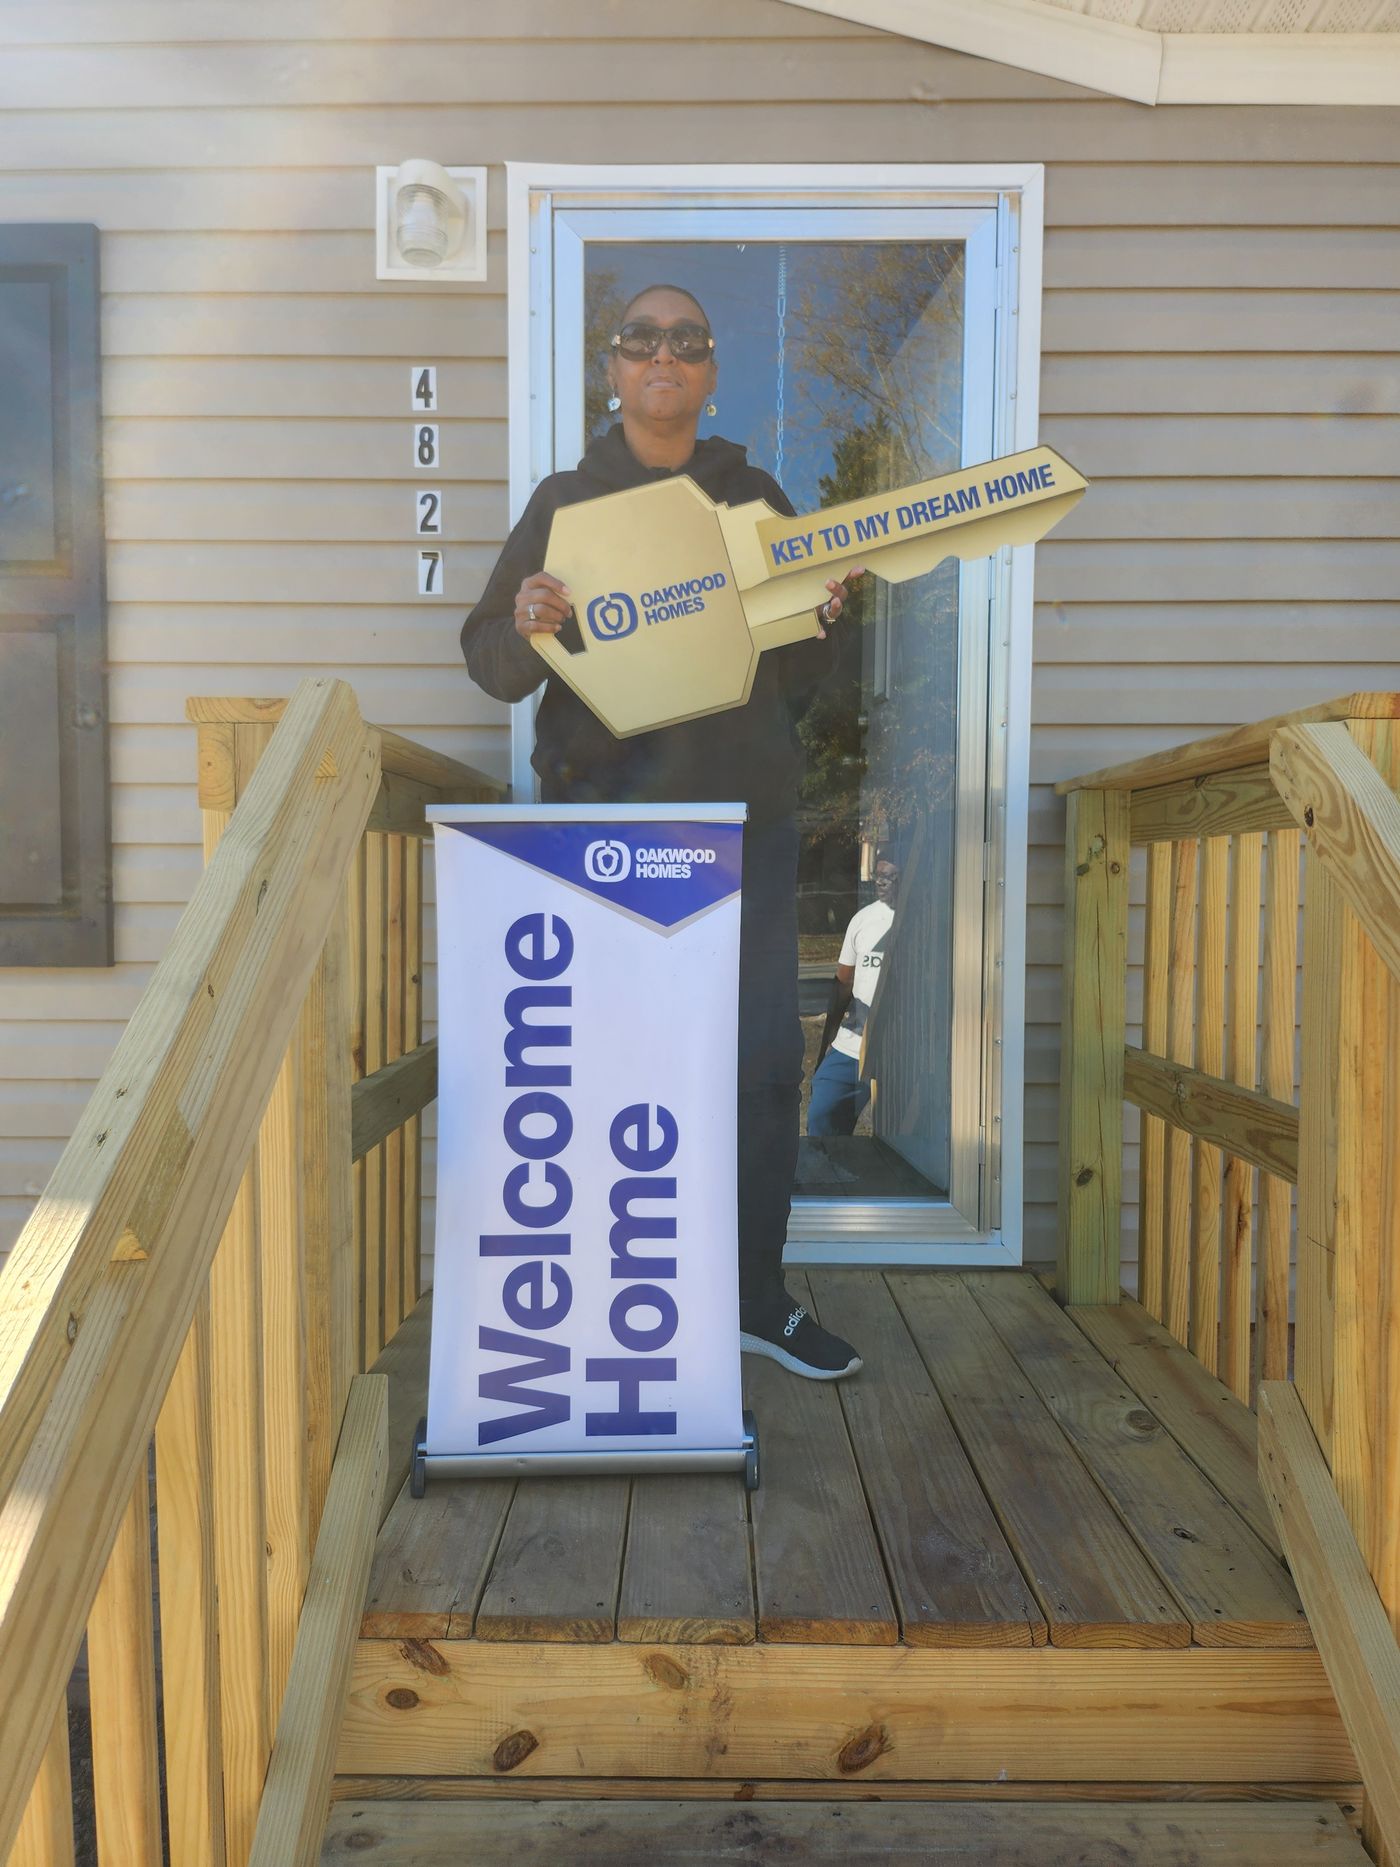 LYNN W. welcome home image